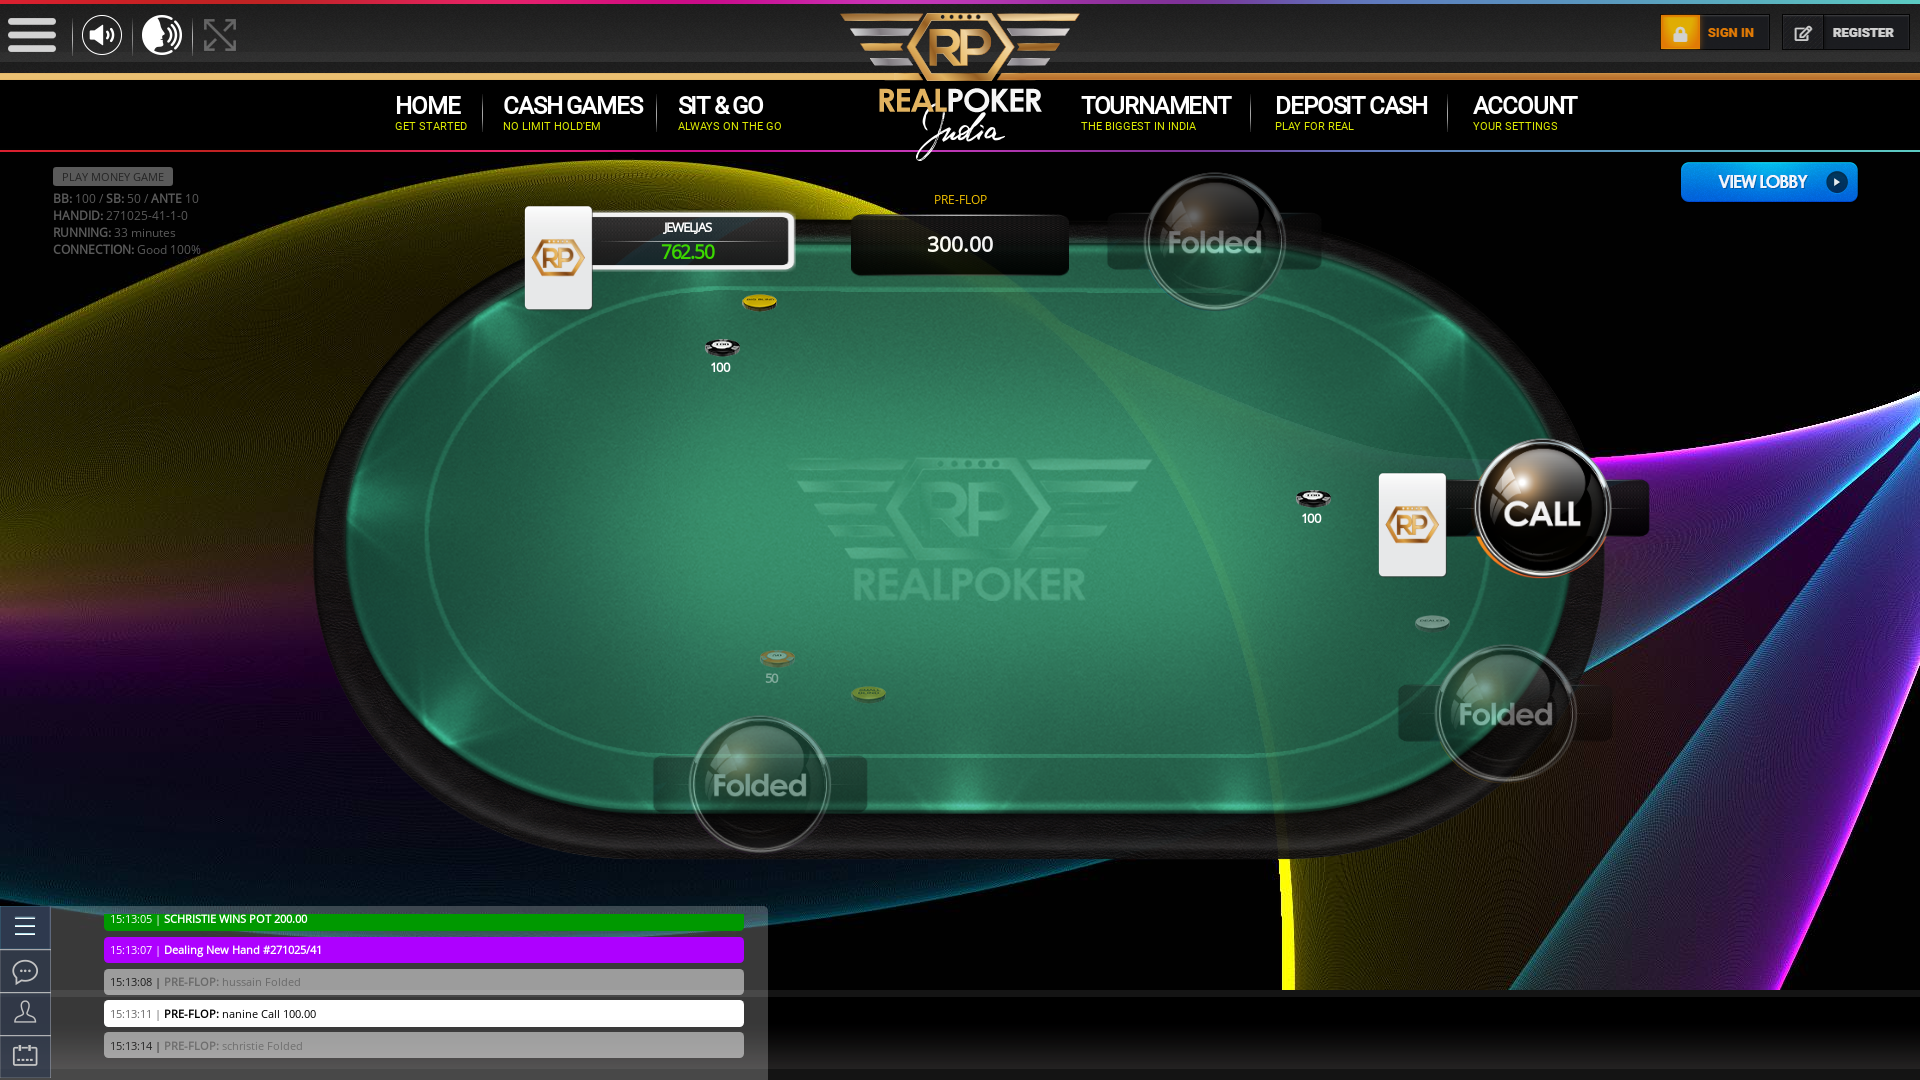 Indian online poker on a 10 player table in the 33rd minute match up